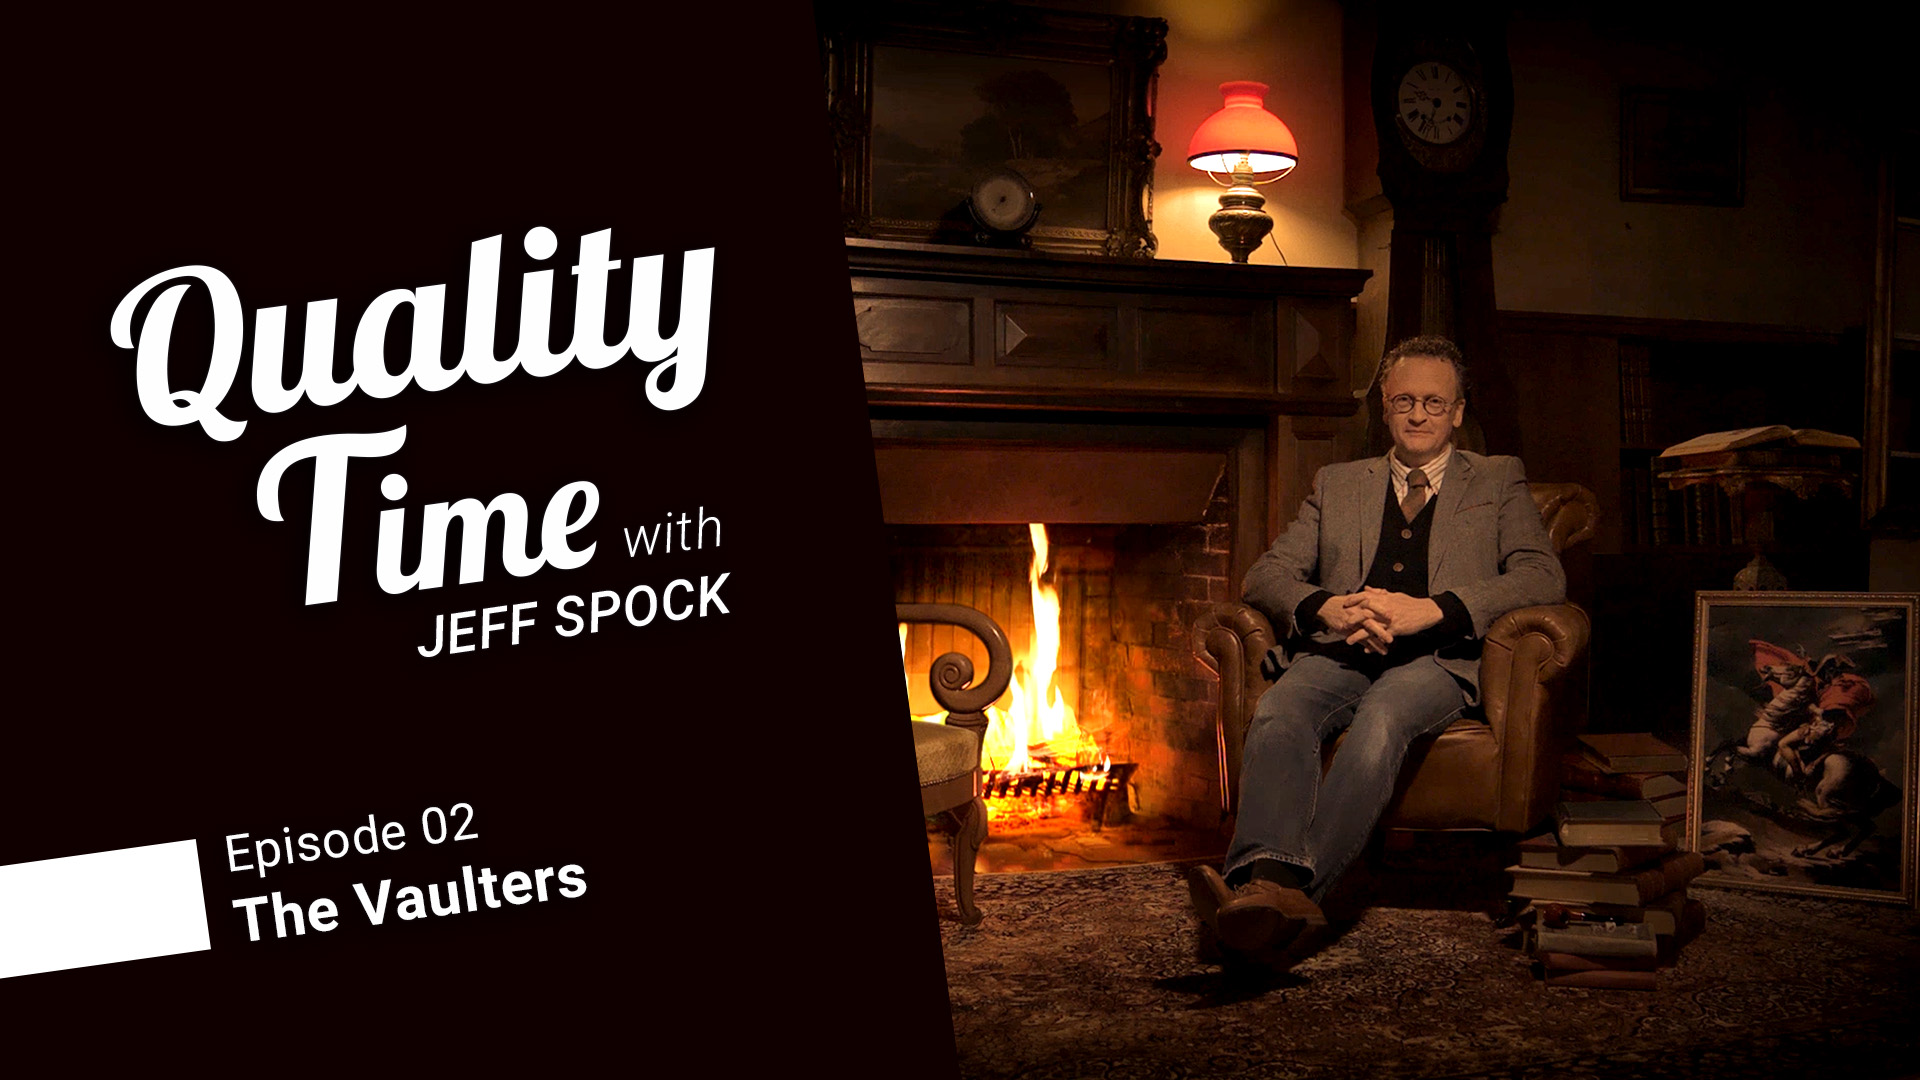 Quality time, with Jeff -- S01E02 The Vaulters